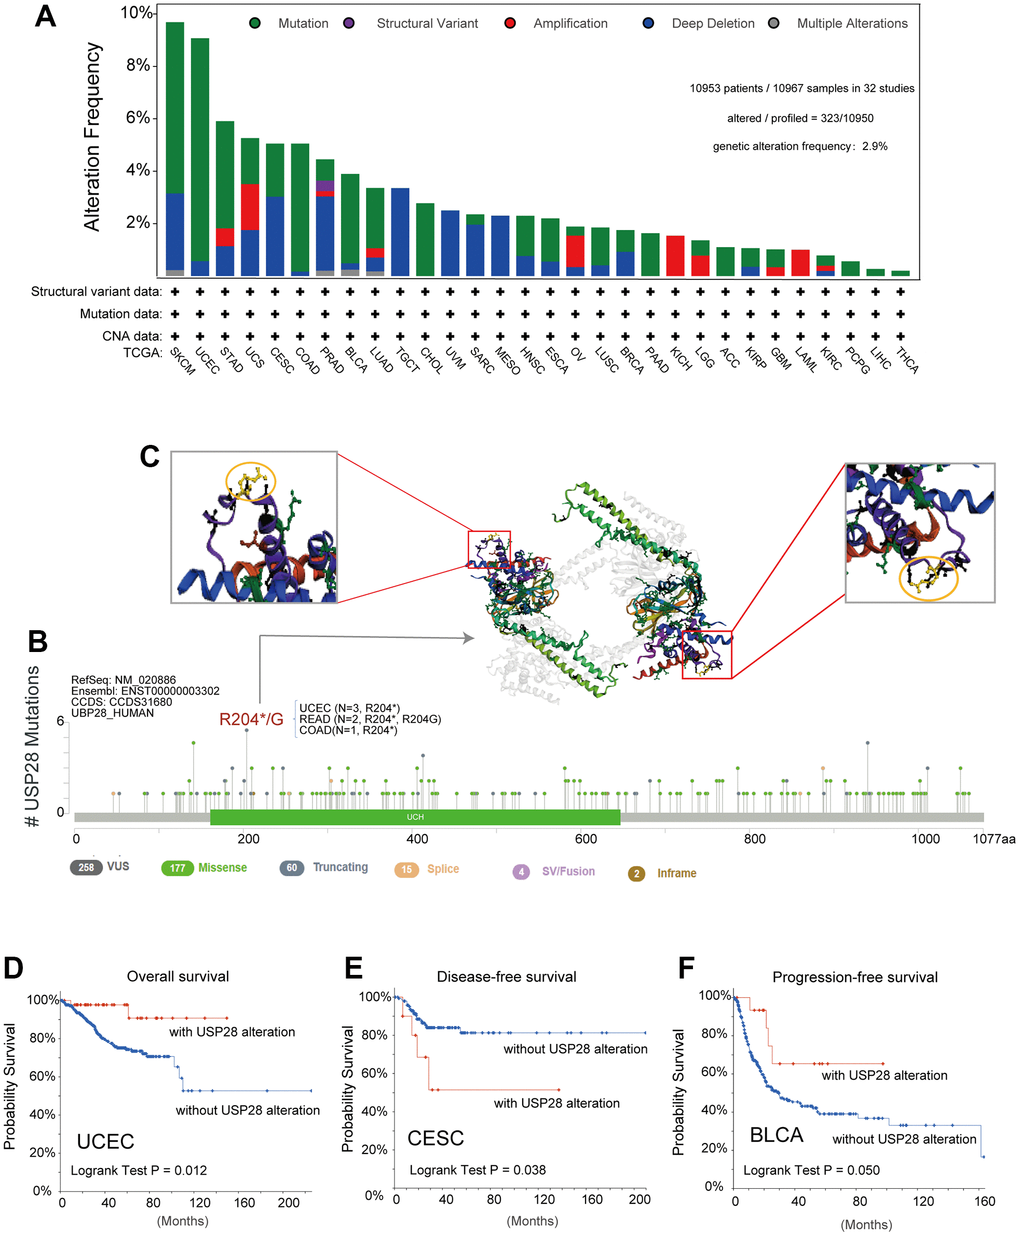 The landscape of genetic alterations of USP28 in pan-cancer. (A) The alteration frequency with the mutation type of USP28 for the TCGA tumors was analyzed by the cBioPortal tool. (B) The protein domain displayed all the mutation sites and mutation types of USP28. (C) The highest alteration frequency (R204*/G) was shown in the 3D structure of USP28 (labeled in yellow). (D–F) The potential correlation between alteration status of USP28 and clinical prognostic indices, including overall survival, disease-free survival, and progression-free survival in specific cancers.